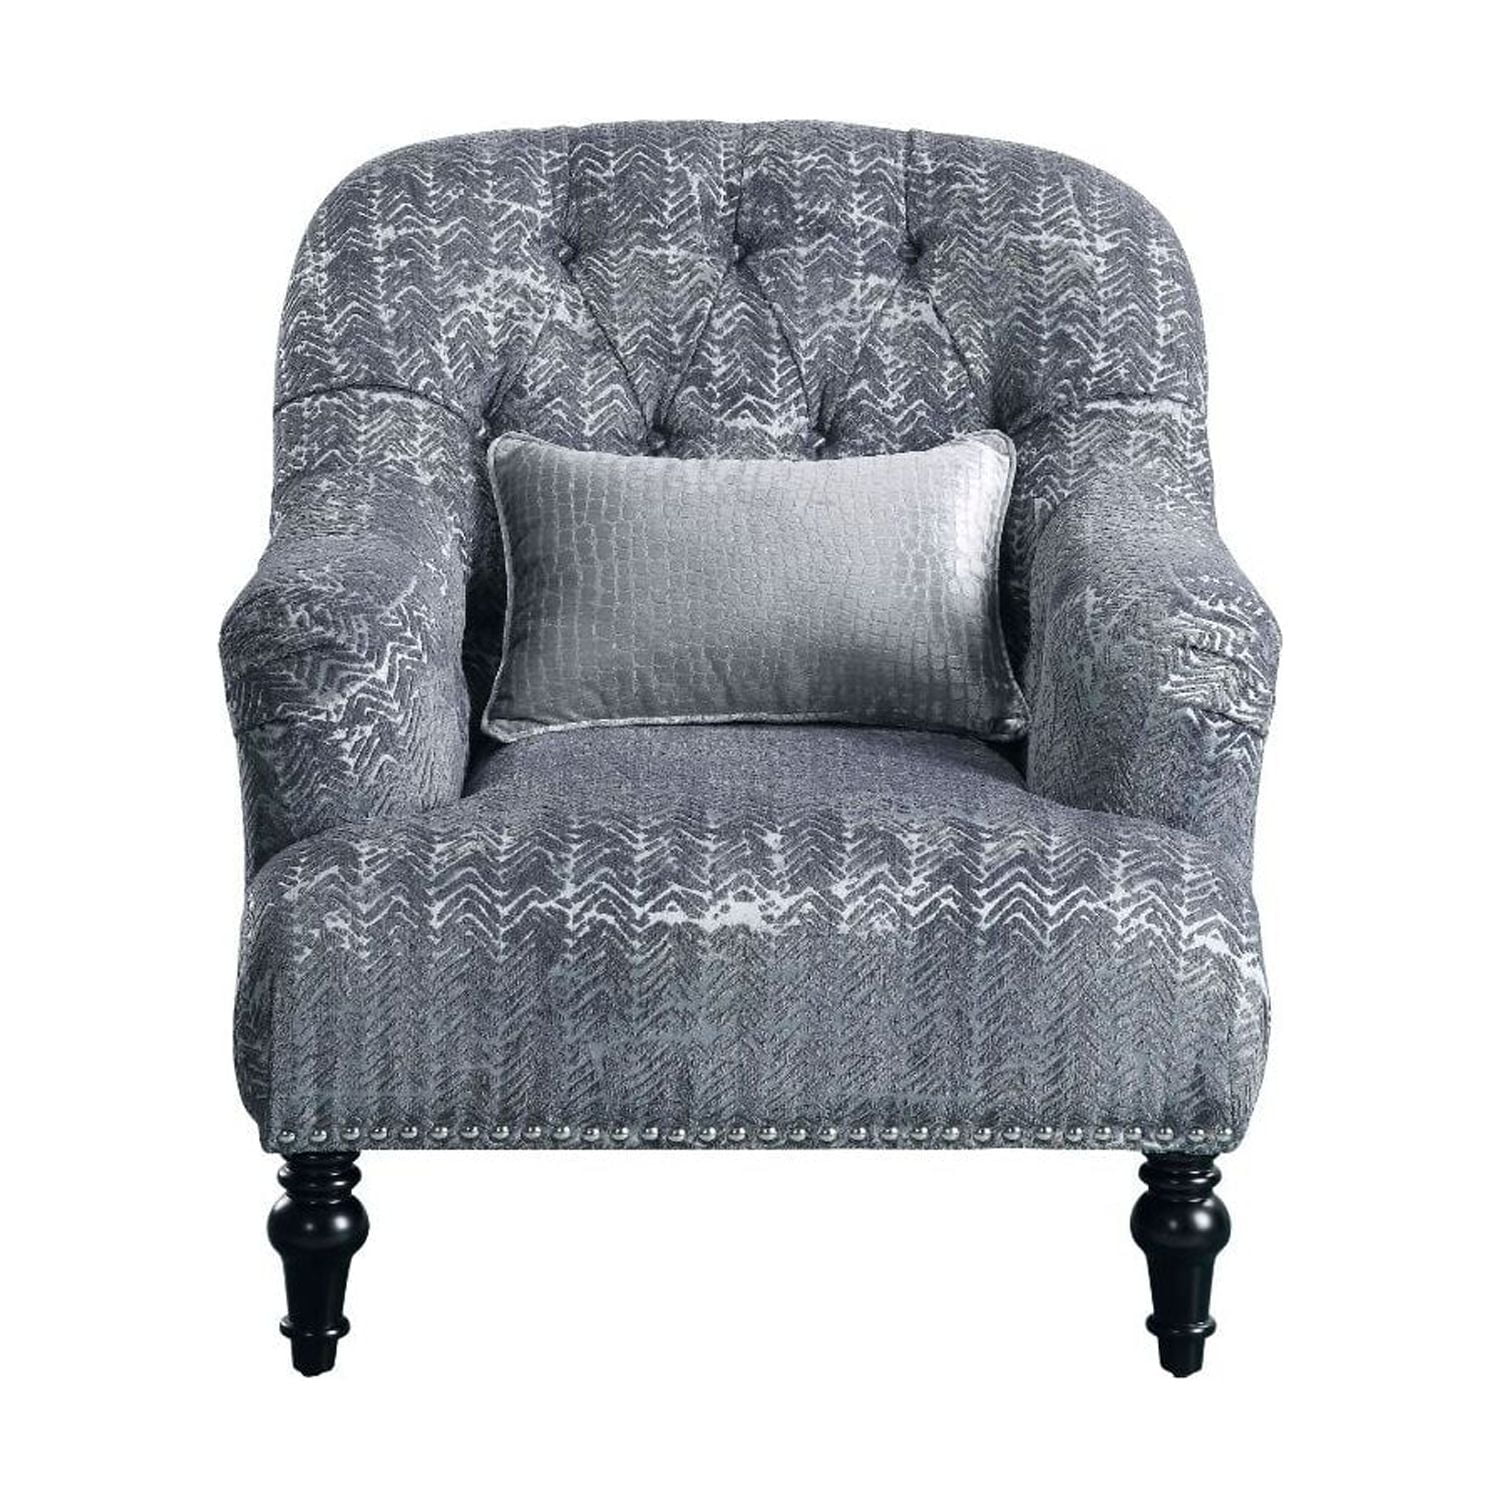 Picture of ACME 53092 Gaura Chair with 1 Pillow - Pattern Gray Velvet - 37 x 34 x 37 in.